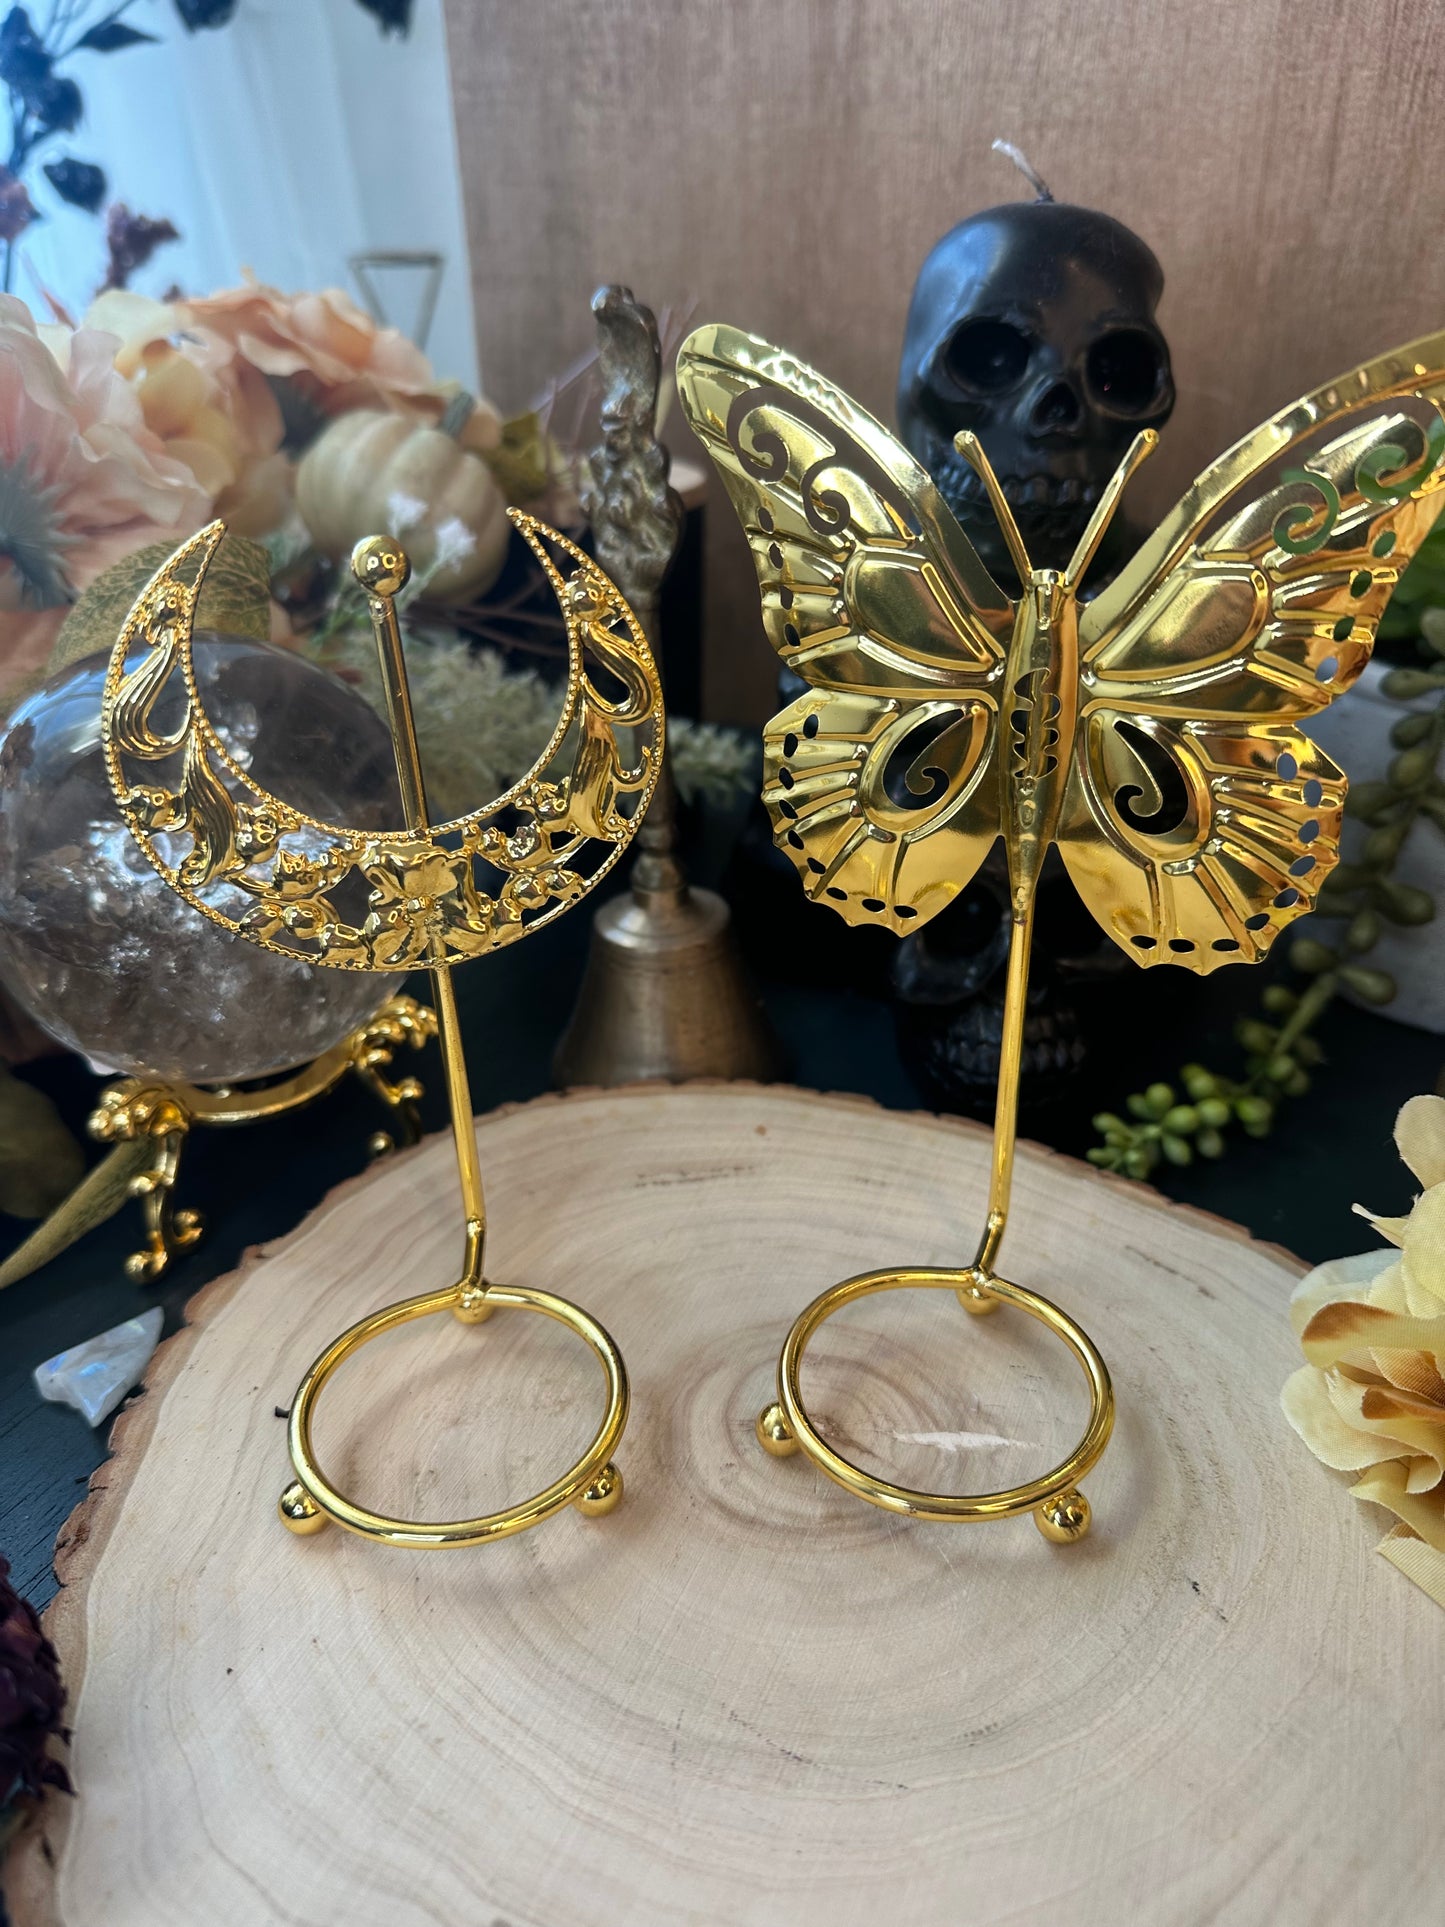 Butterfly or moon sphere stand